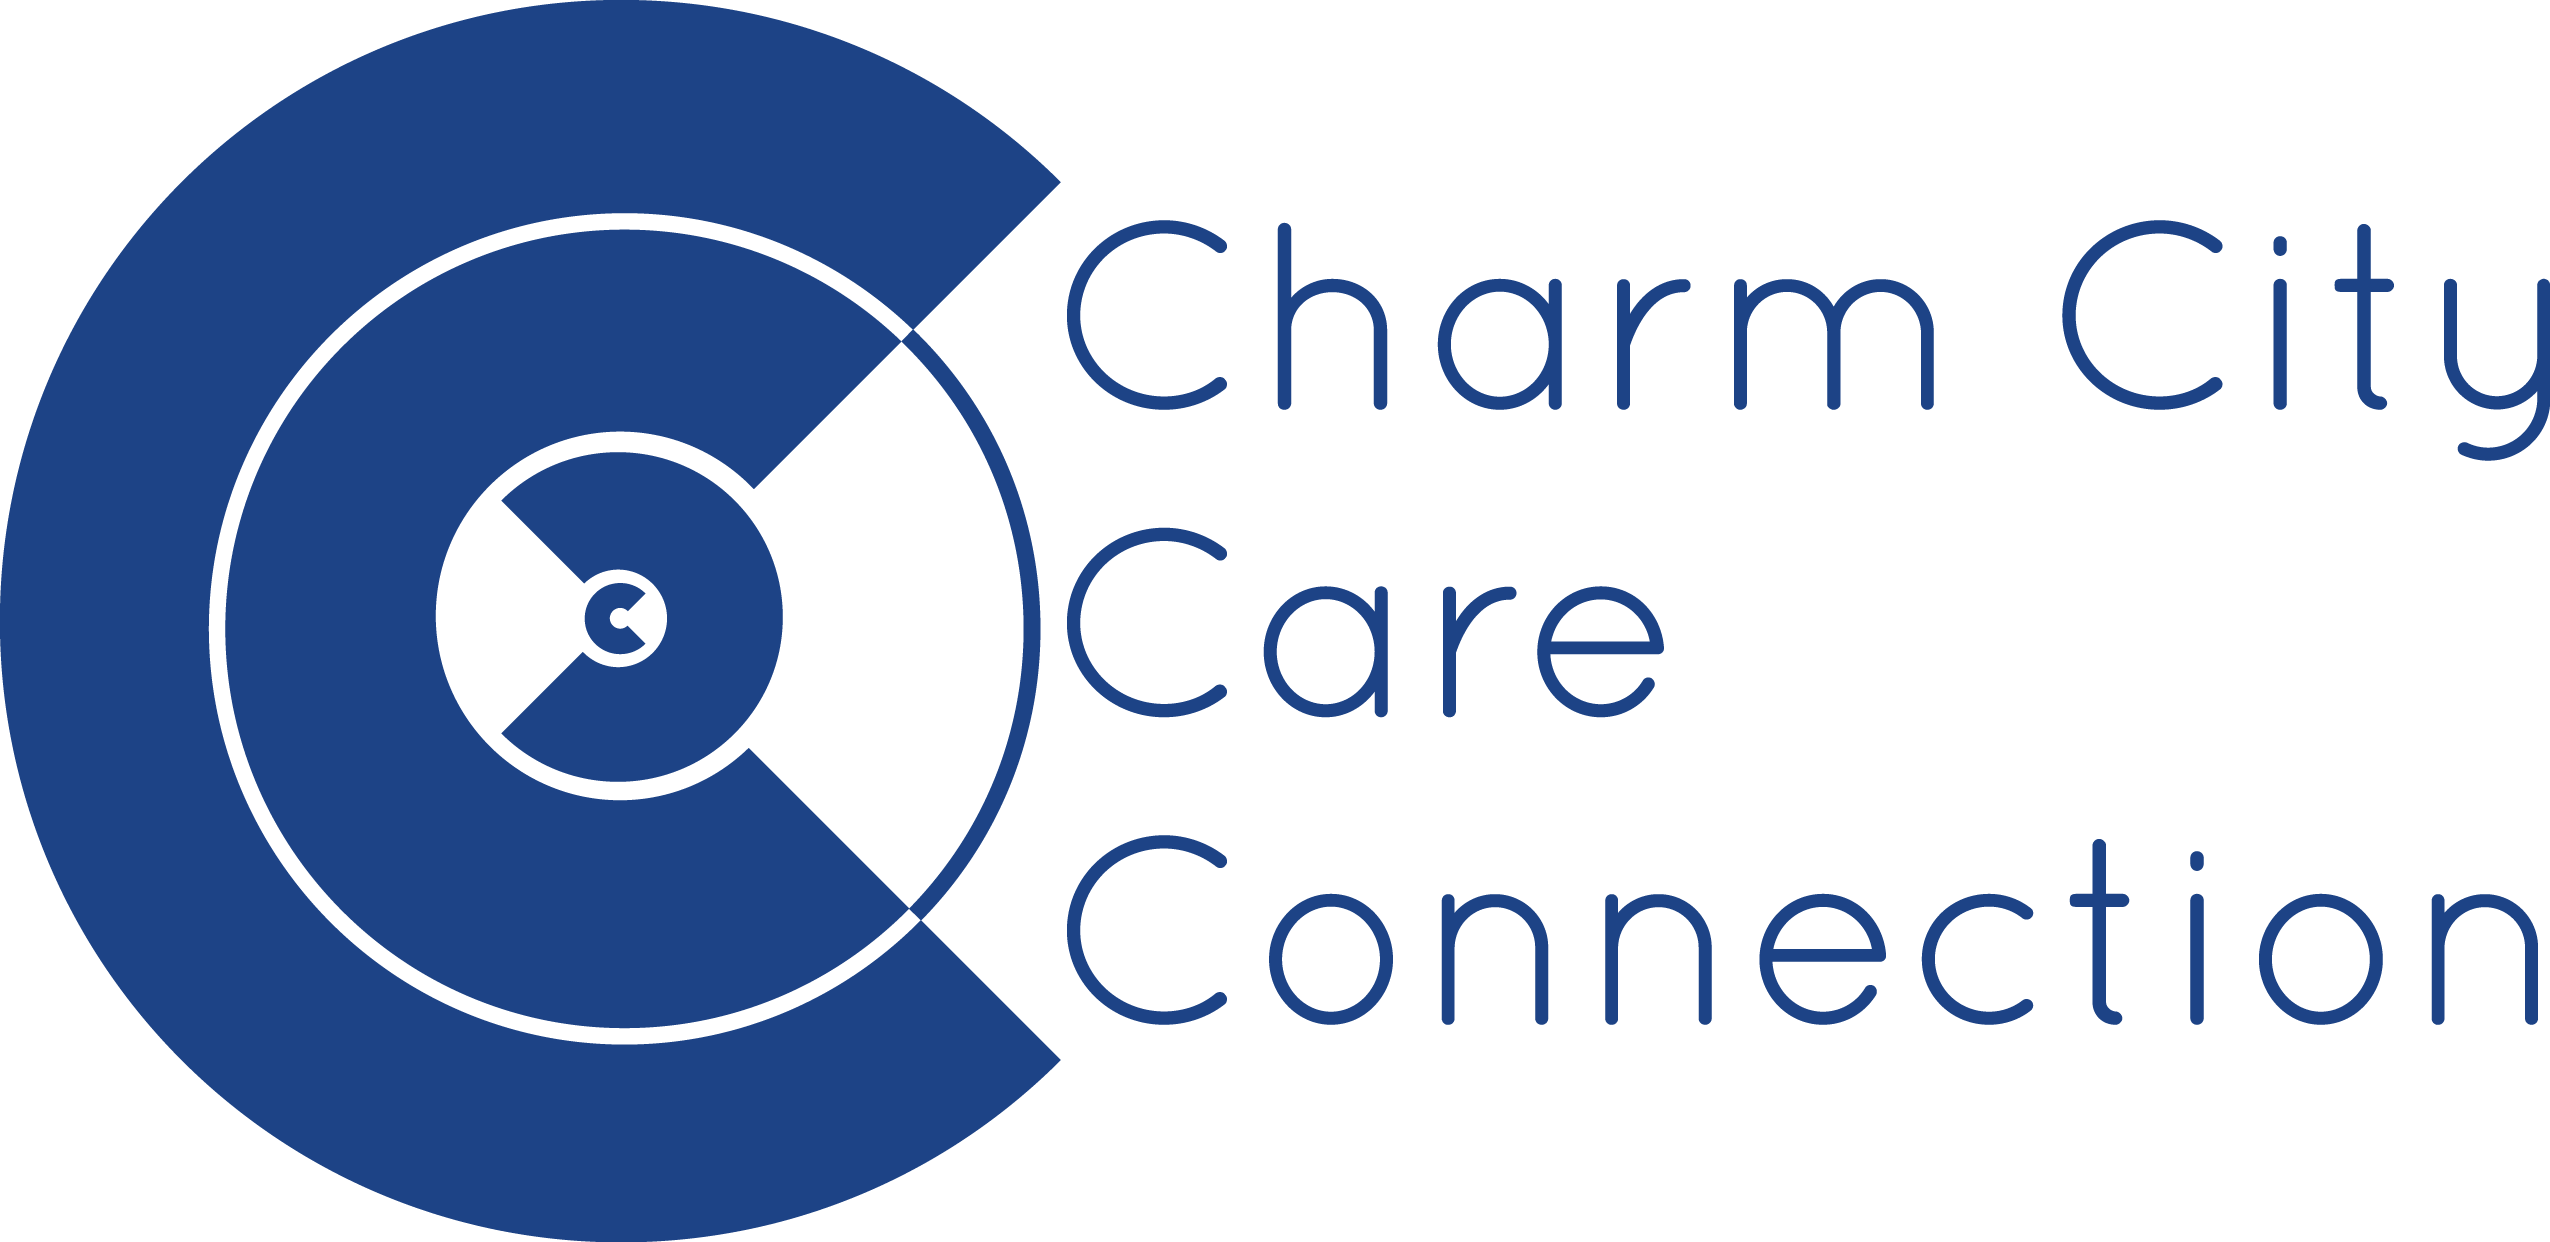 Charm City Care Connection